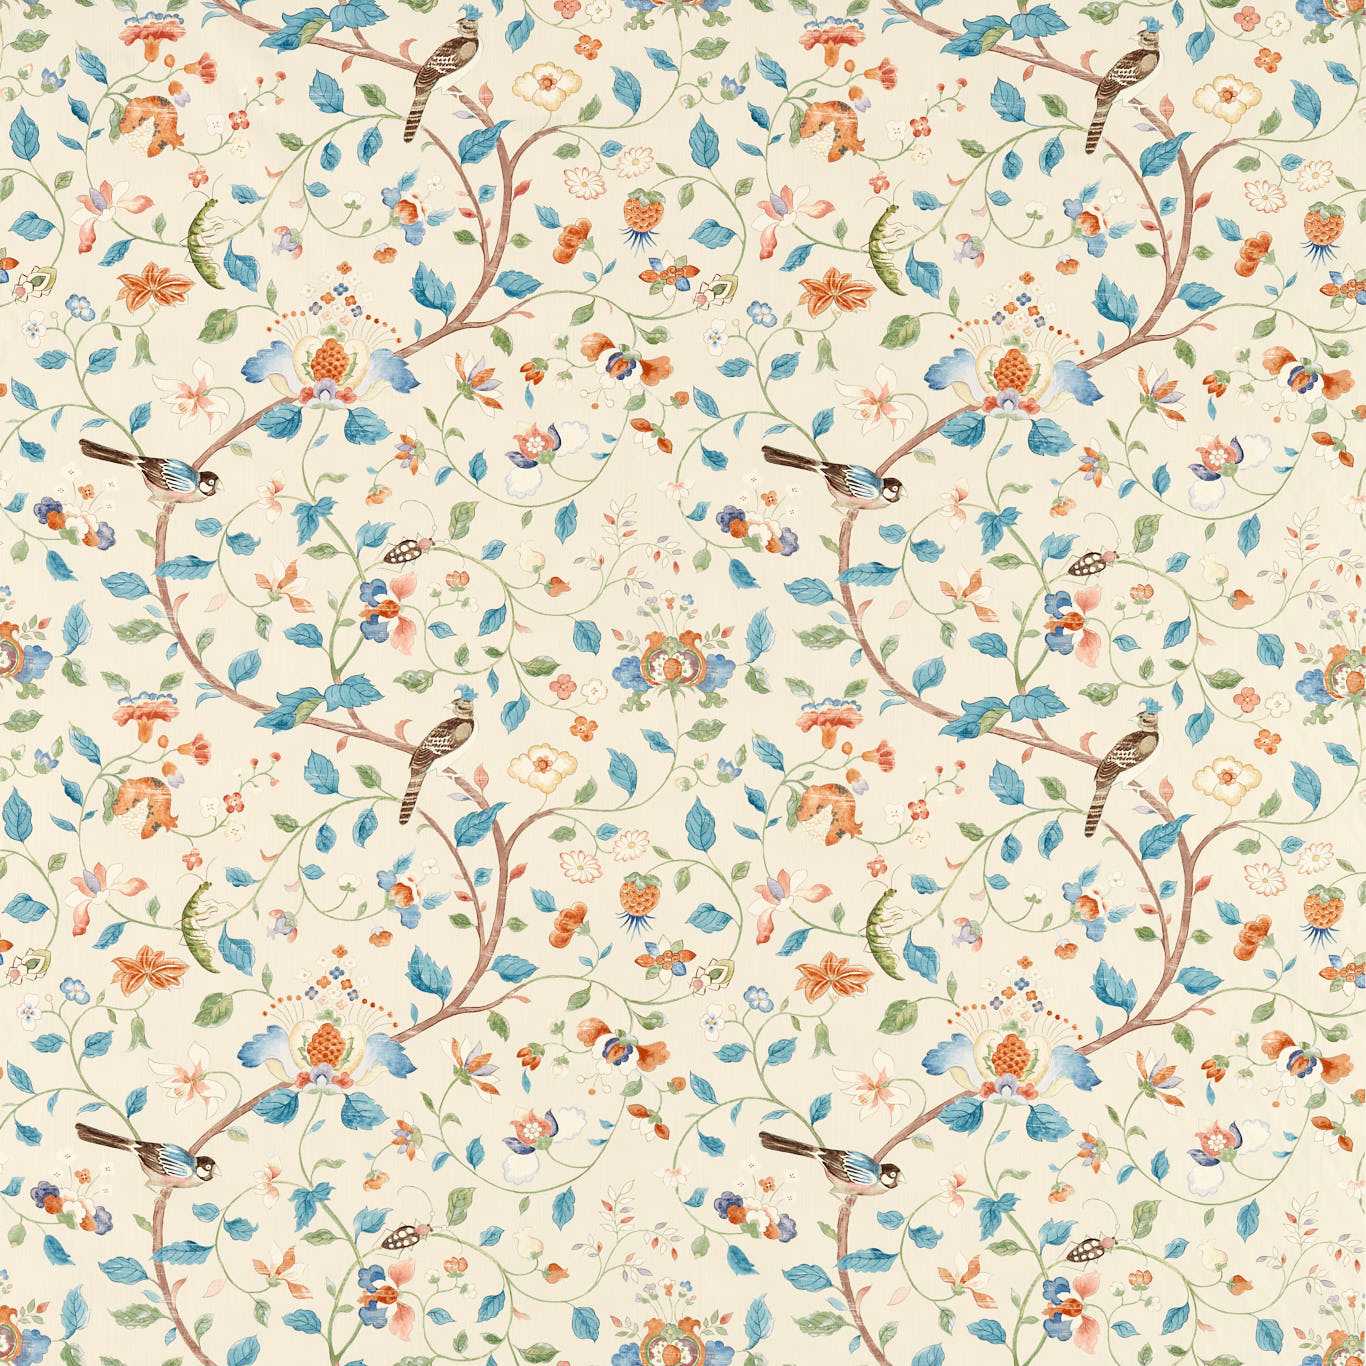 Aril’s Garden Teal/Russet Fabric by SAN